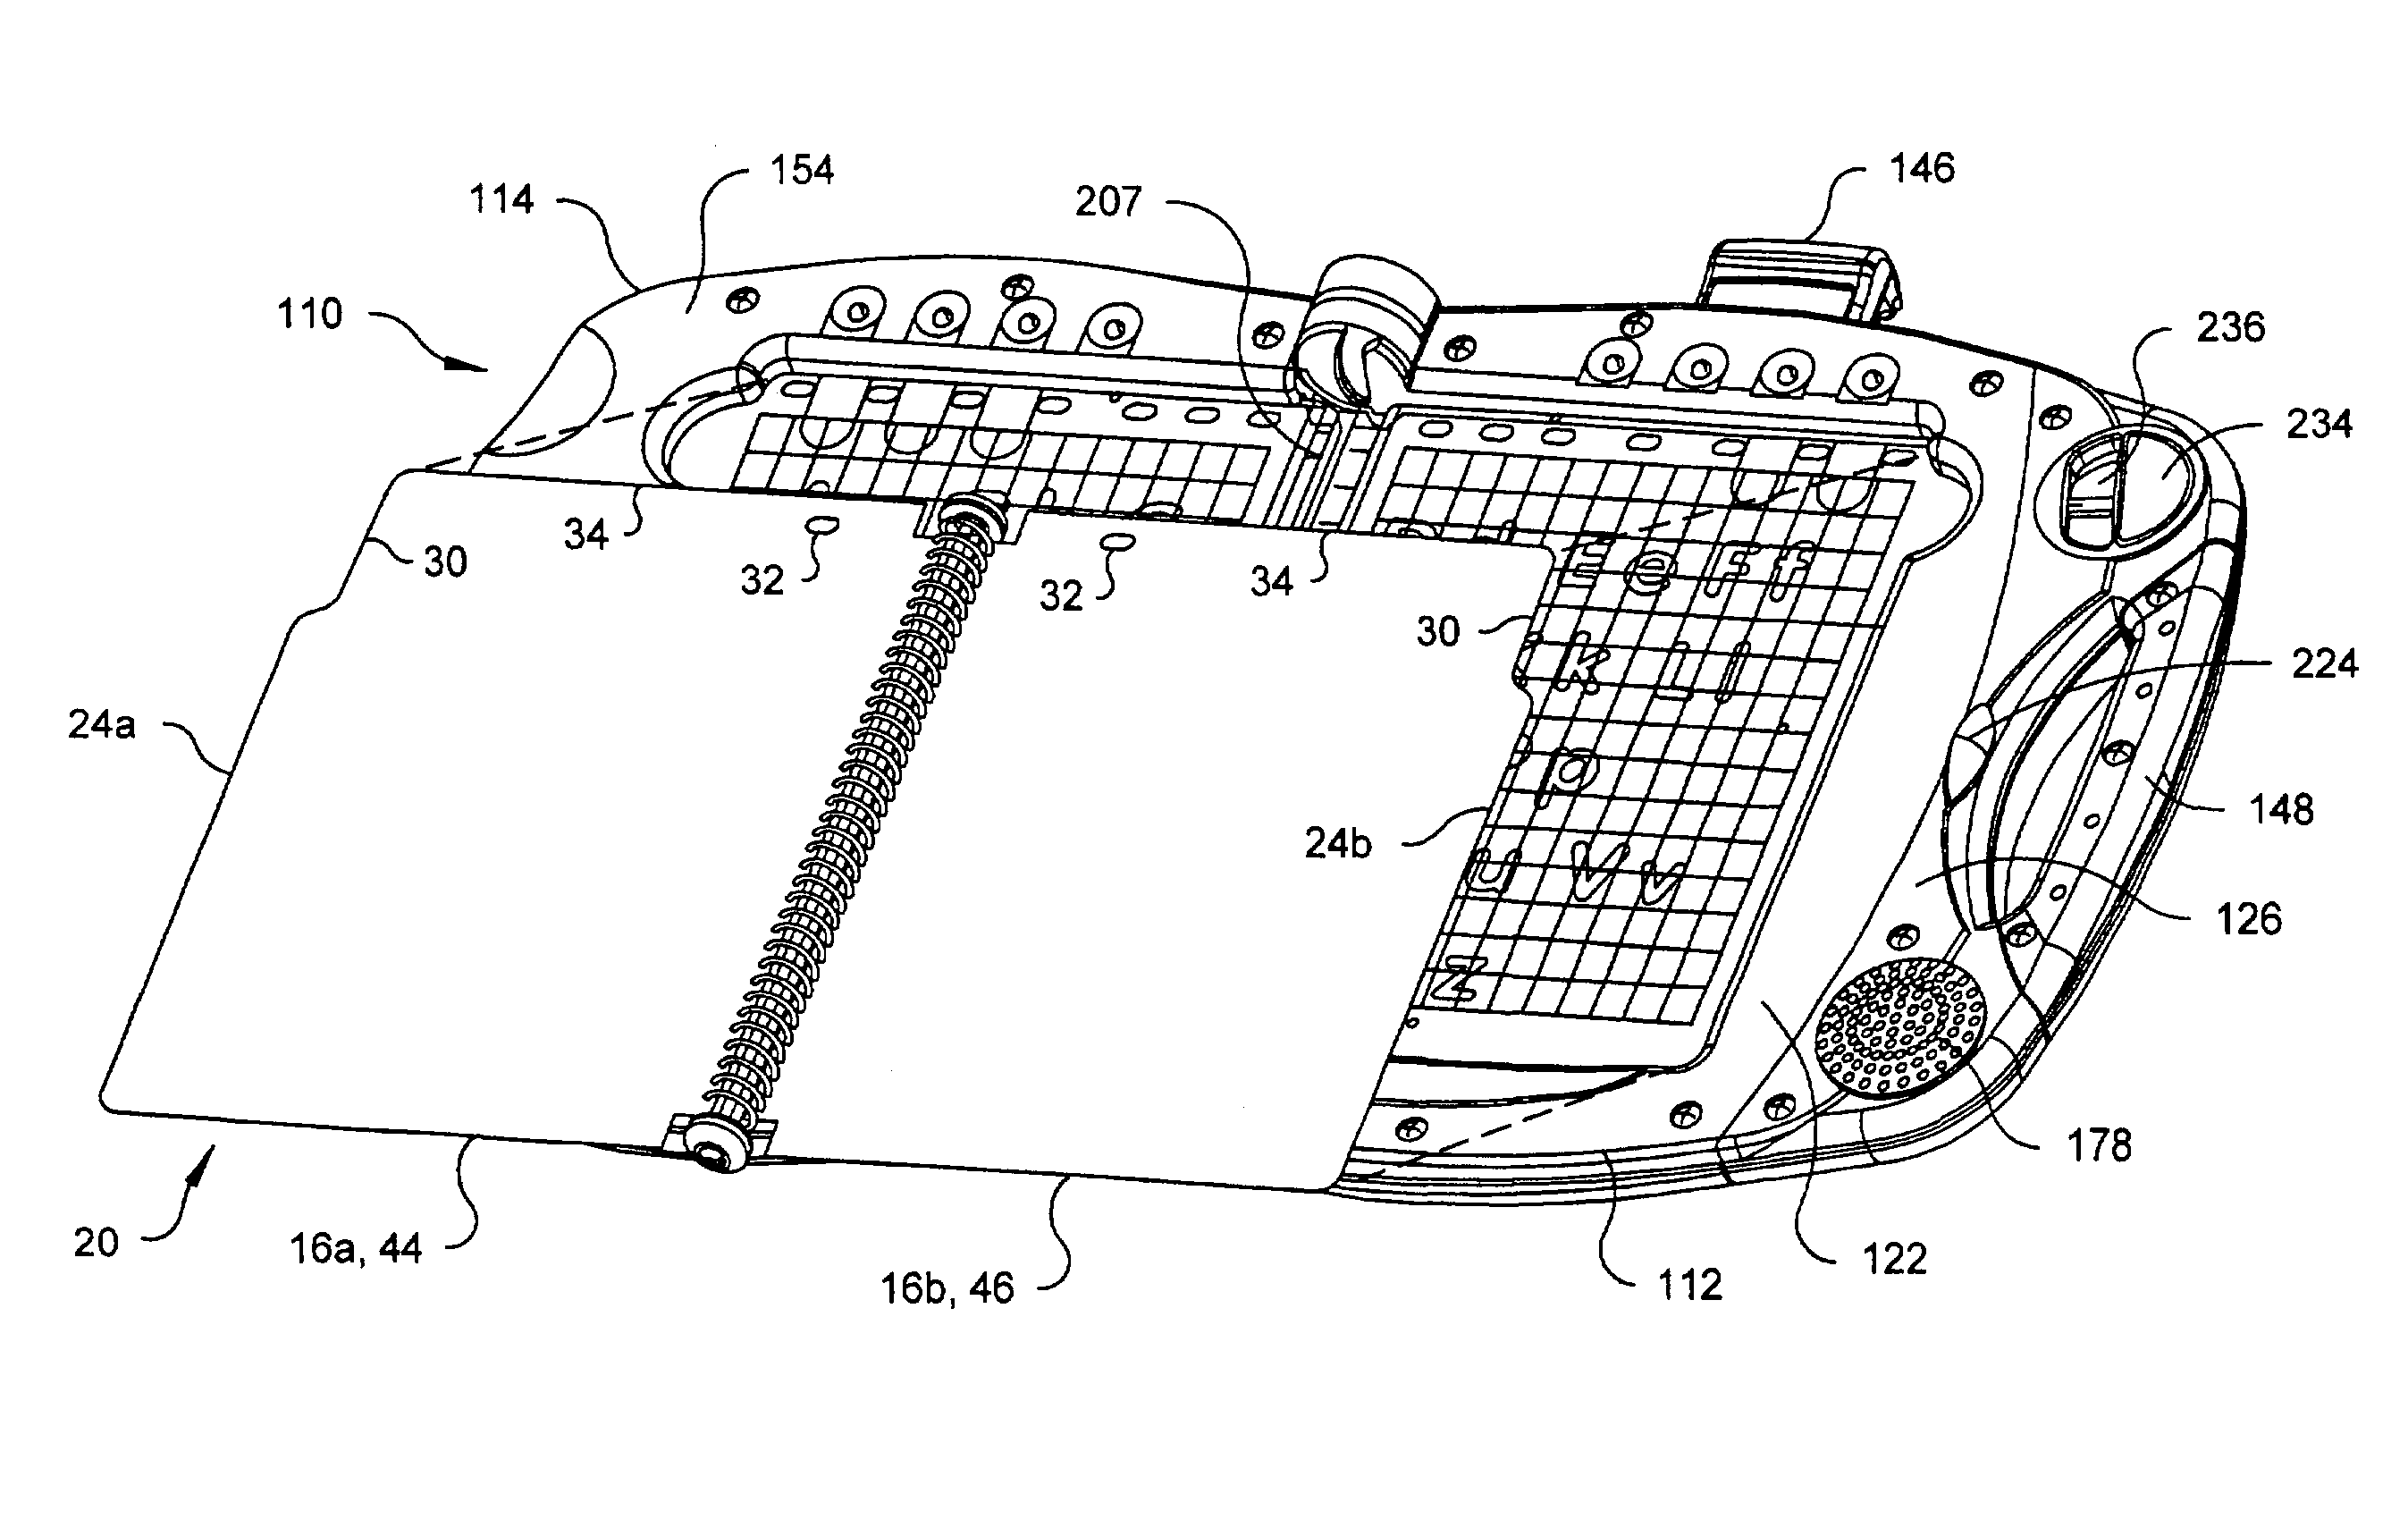 Electronic learning device for an interactive multi-sensory reading system